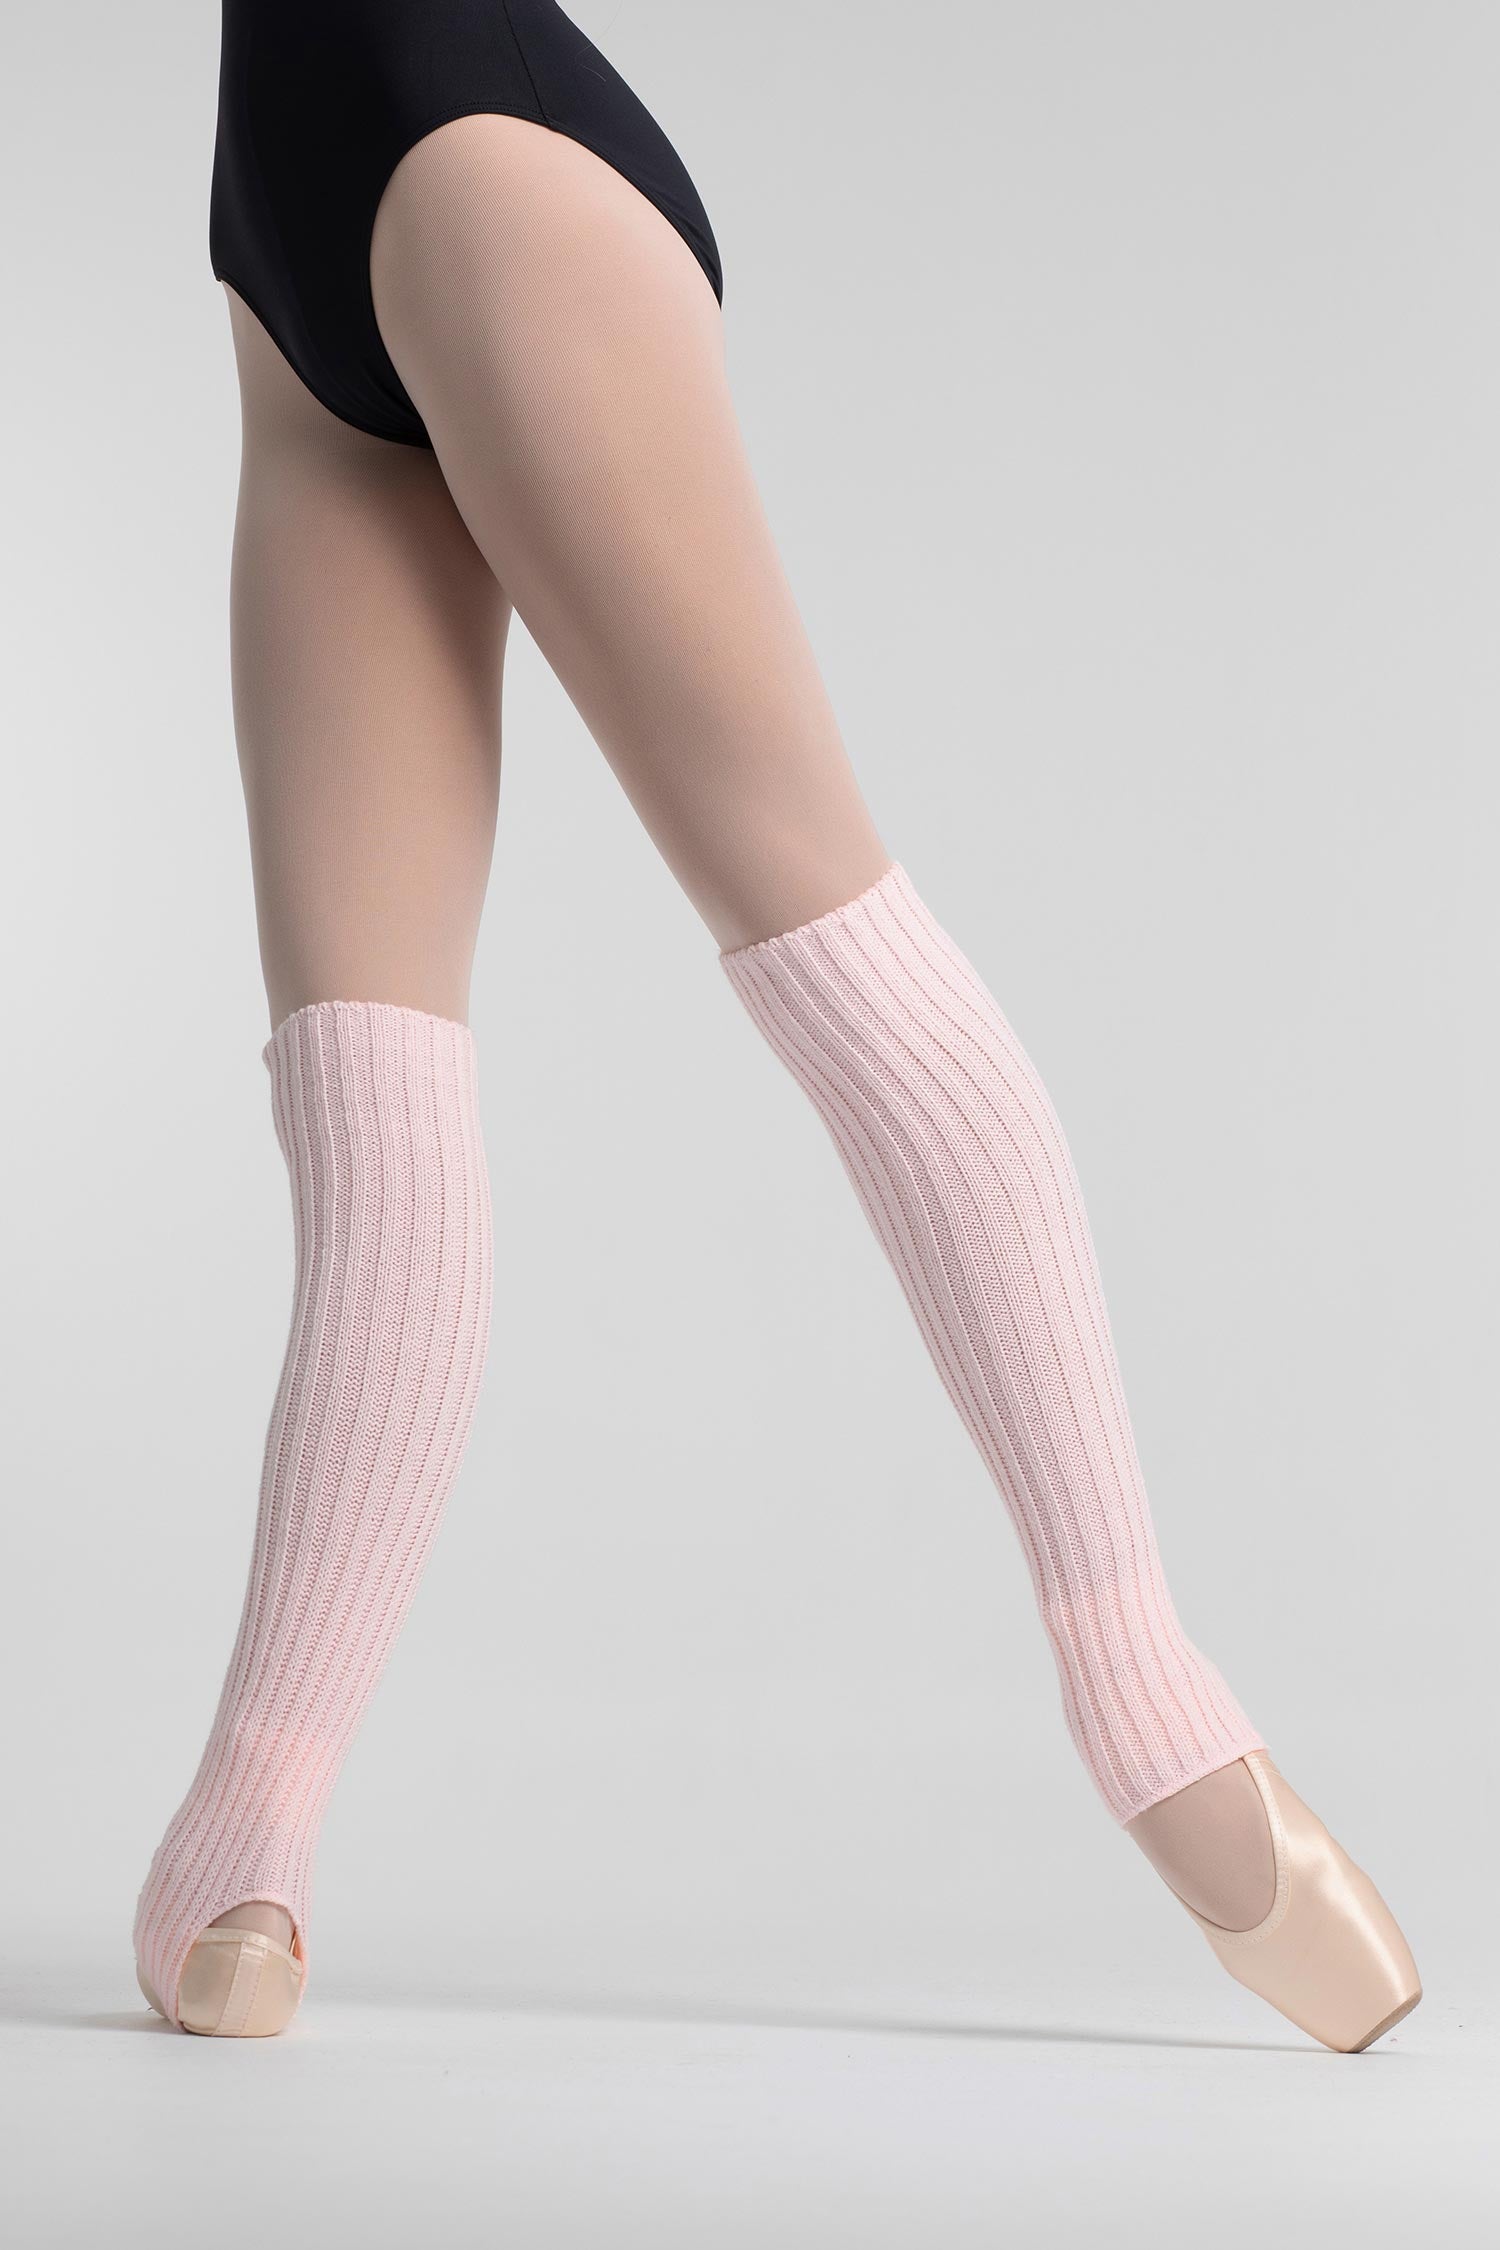 Intermezzo medcan legwarmers short in pink from The Collective Dancewear